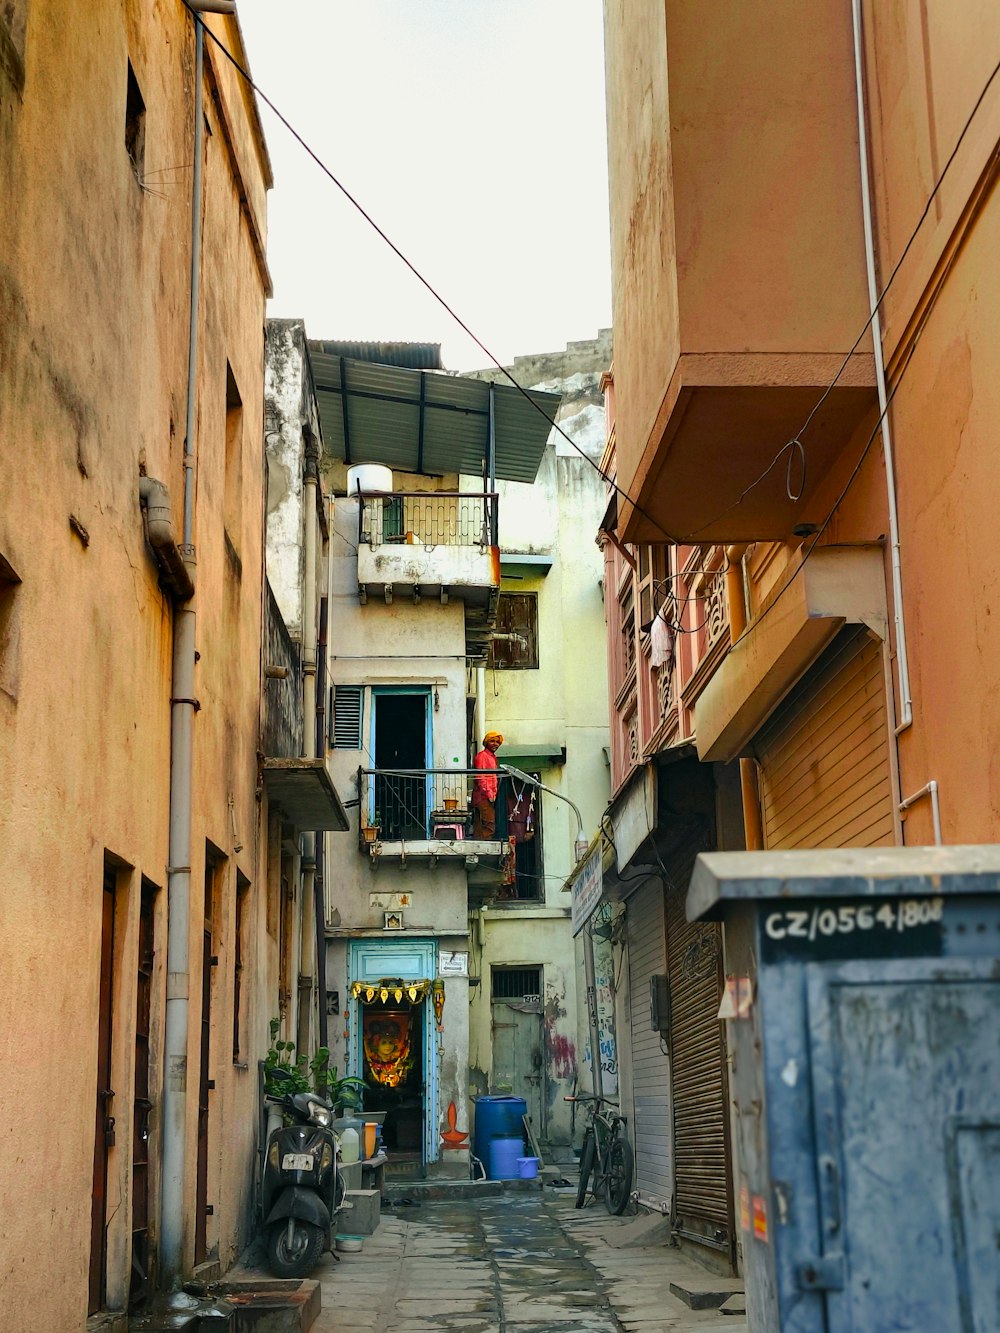 a narrow alleyway with a scooter parked on the side